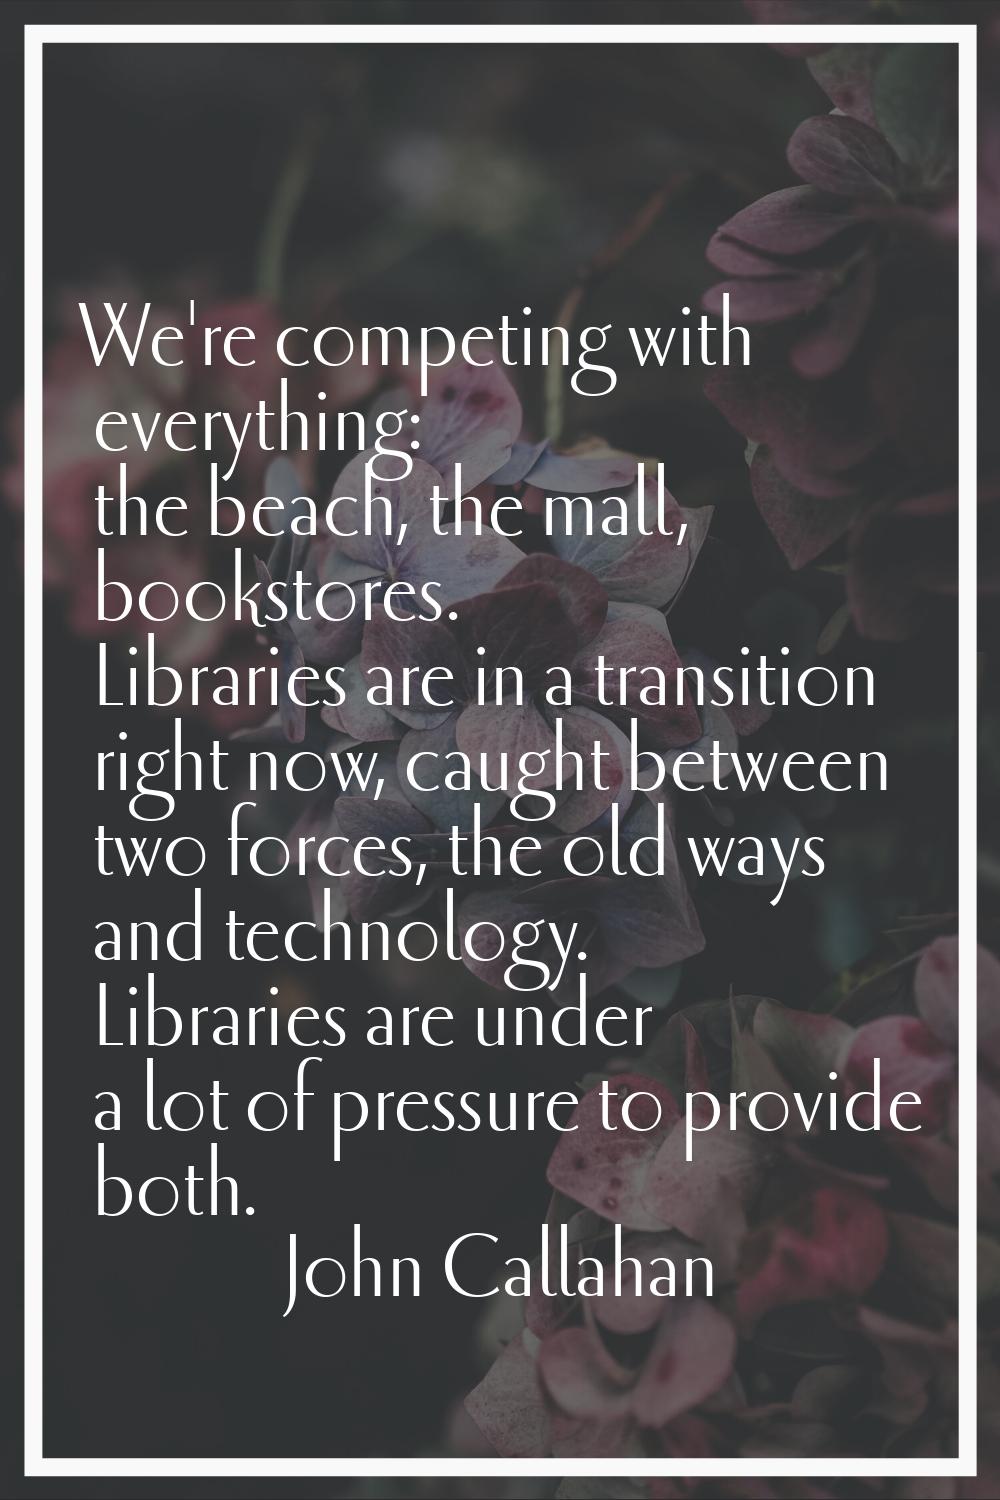 We're competing with everything: the beach, the mall, bookstores. Libraries are in a transition rig